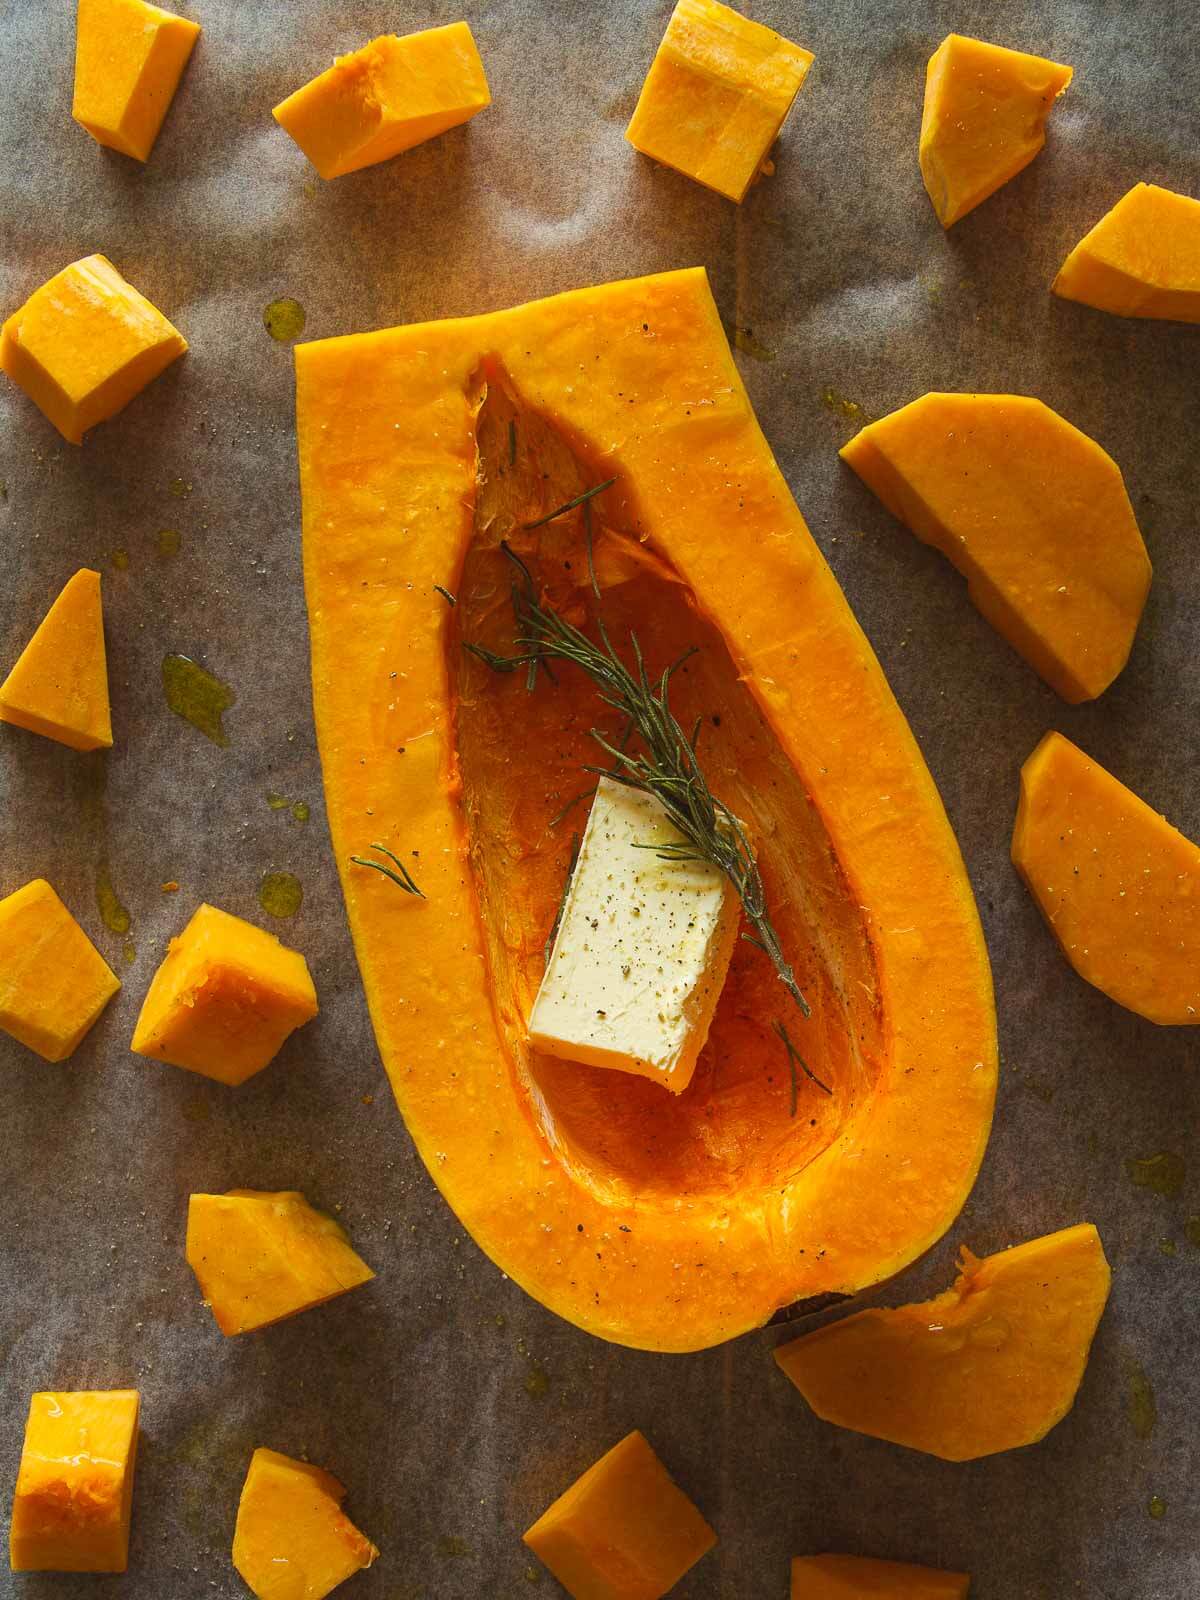 bake the butternut squash with vegan butter and a rosemary sprig